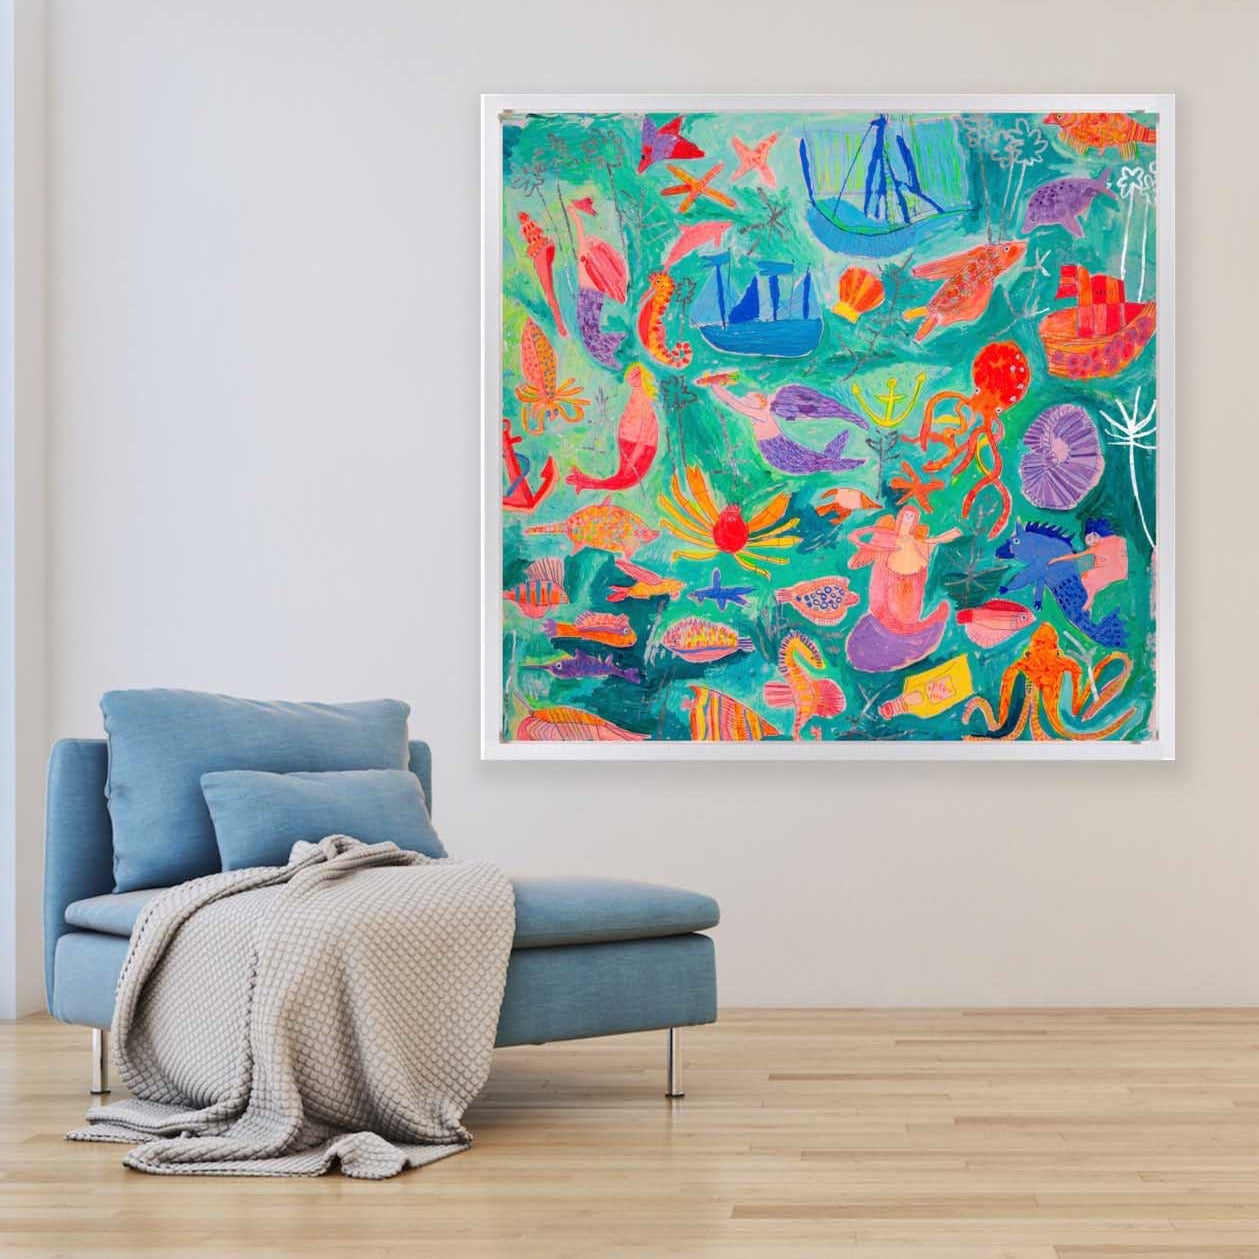 Large bright coloured painting of mermaids, ships and underwater creatures in blues, oranges and pinks  in situ